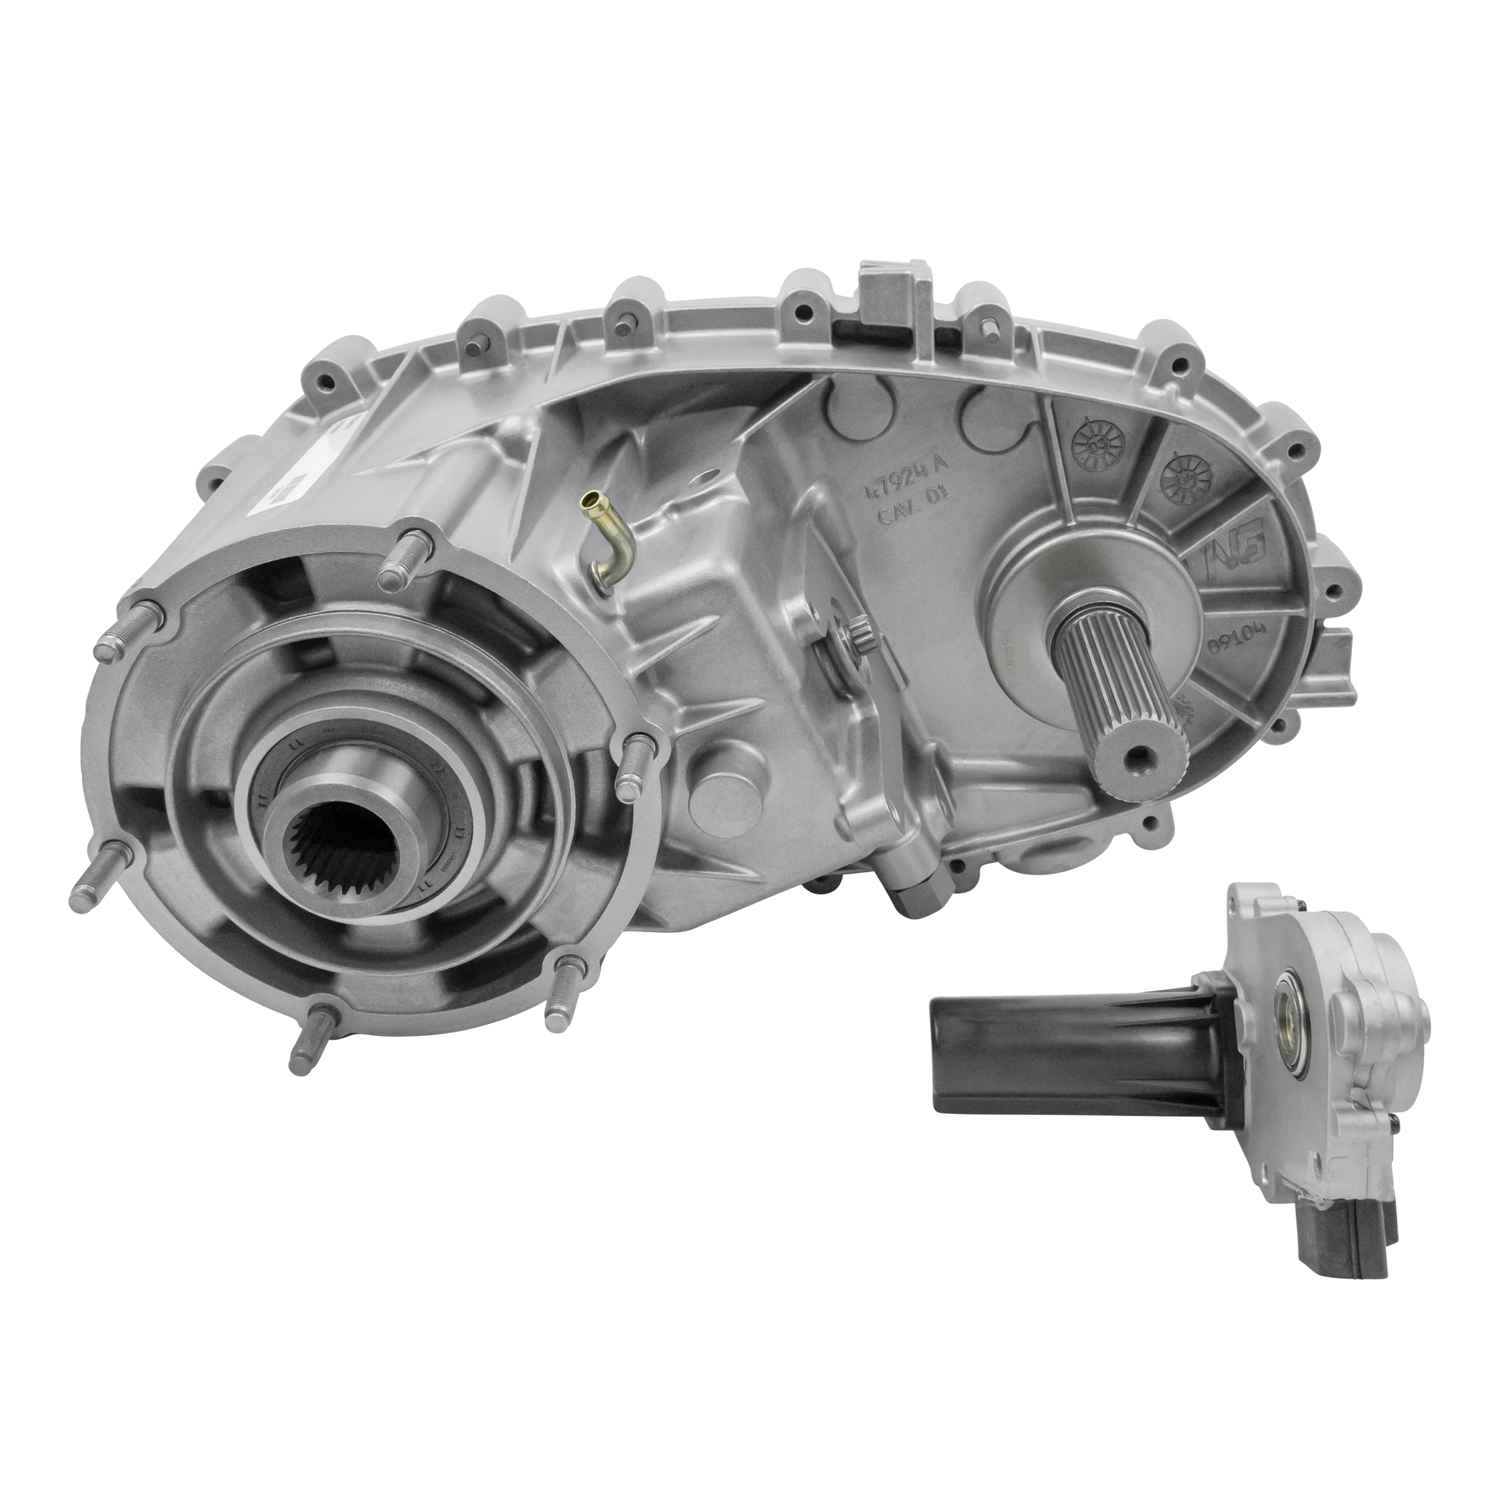 Zumbrota Remanufactured Transfer Case NP244 with Shift Motor 2004-2009 Chrysler